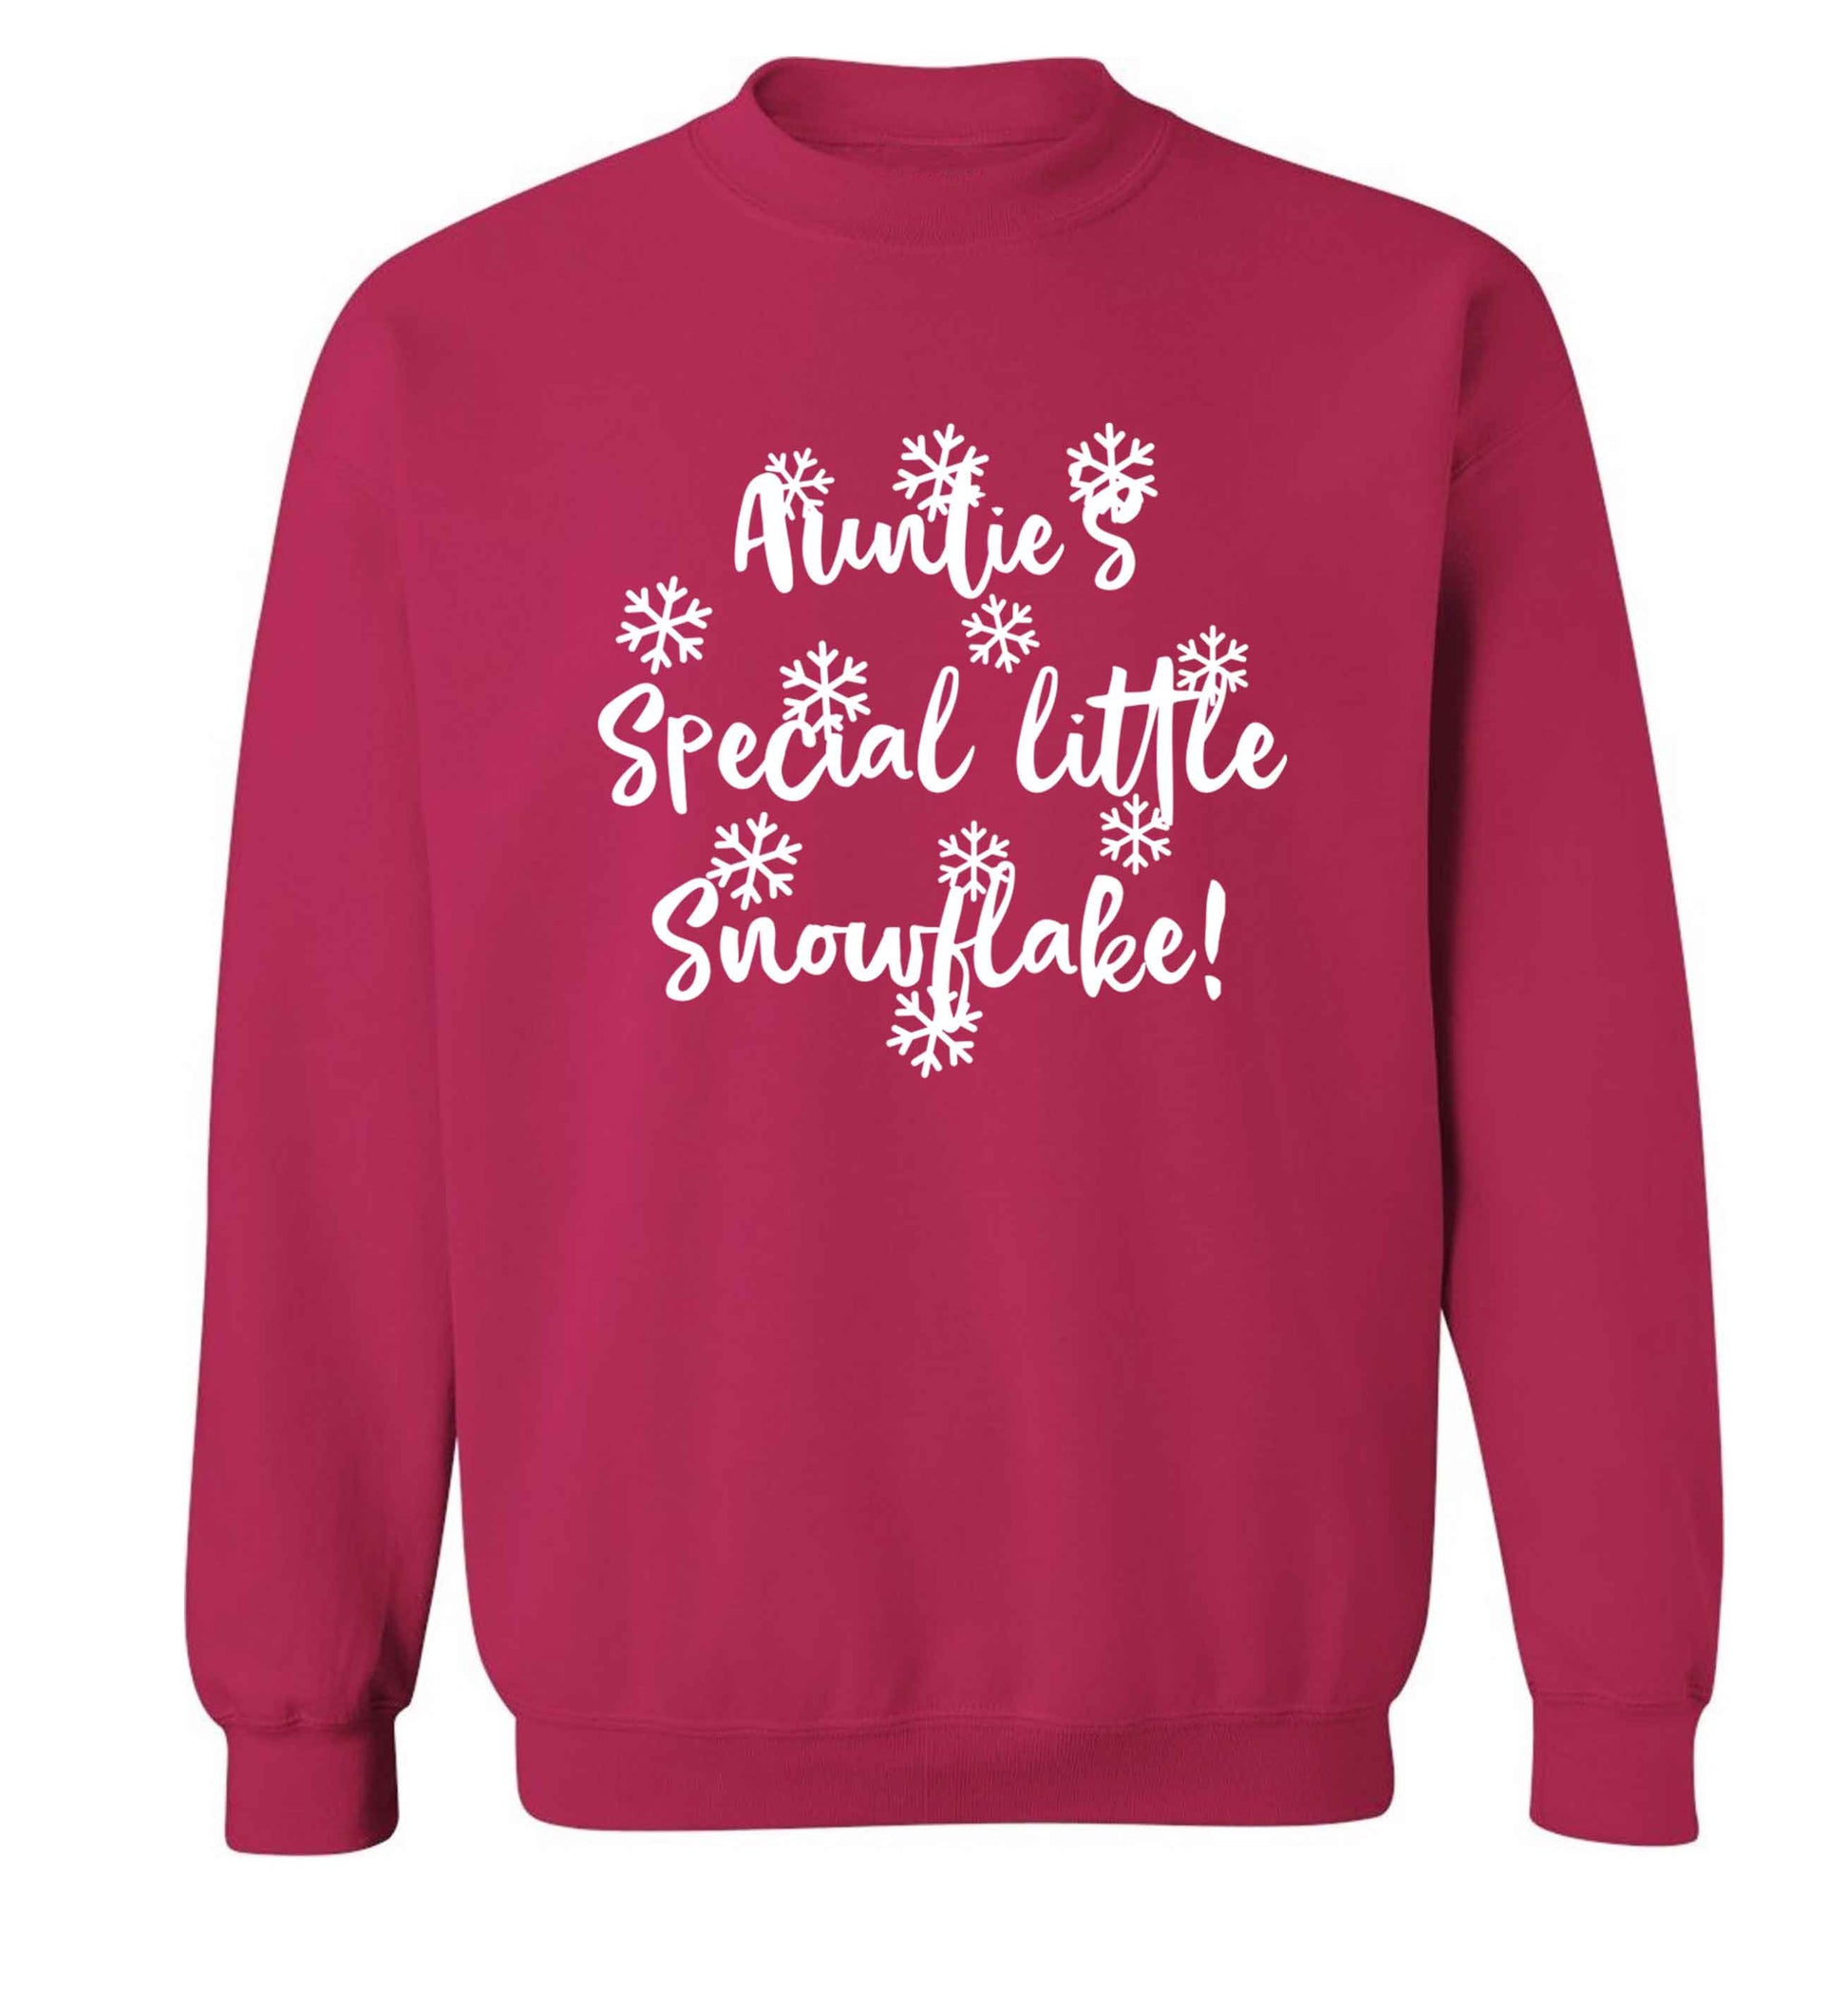 Auntie's special little snowflake Adult's unisex pink Sweater 2XL